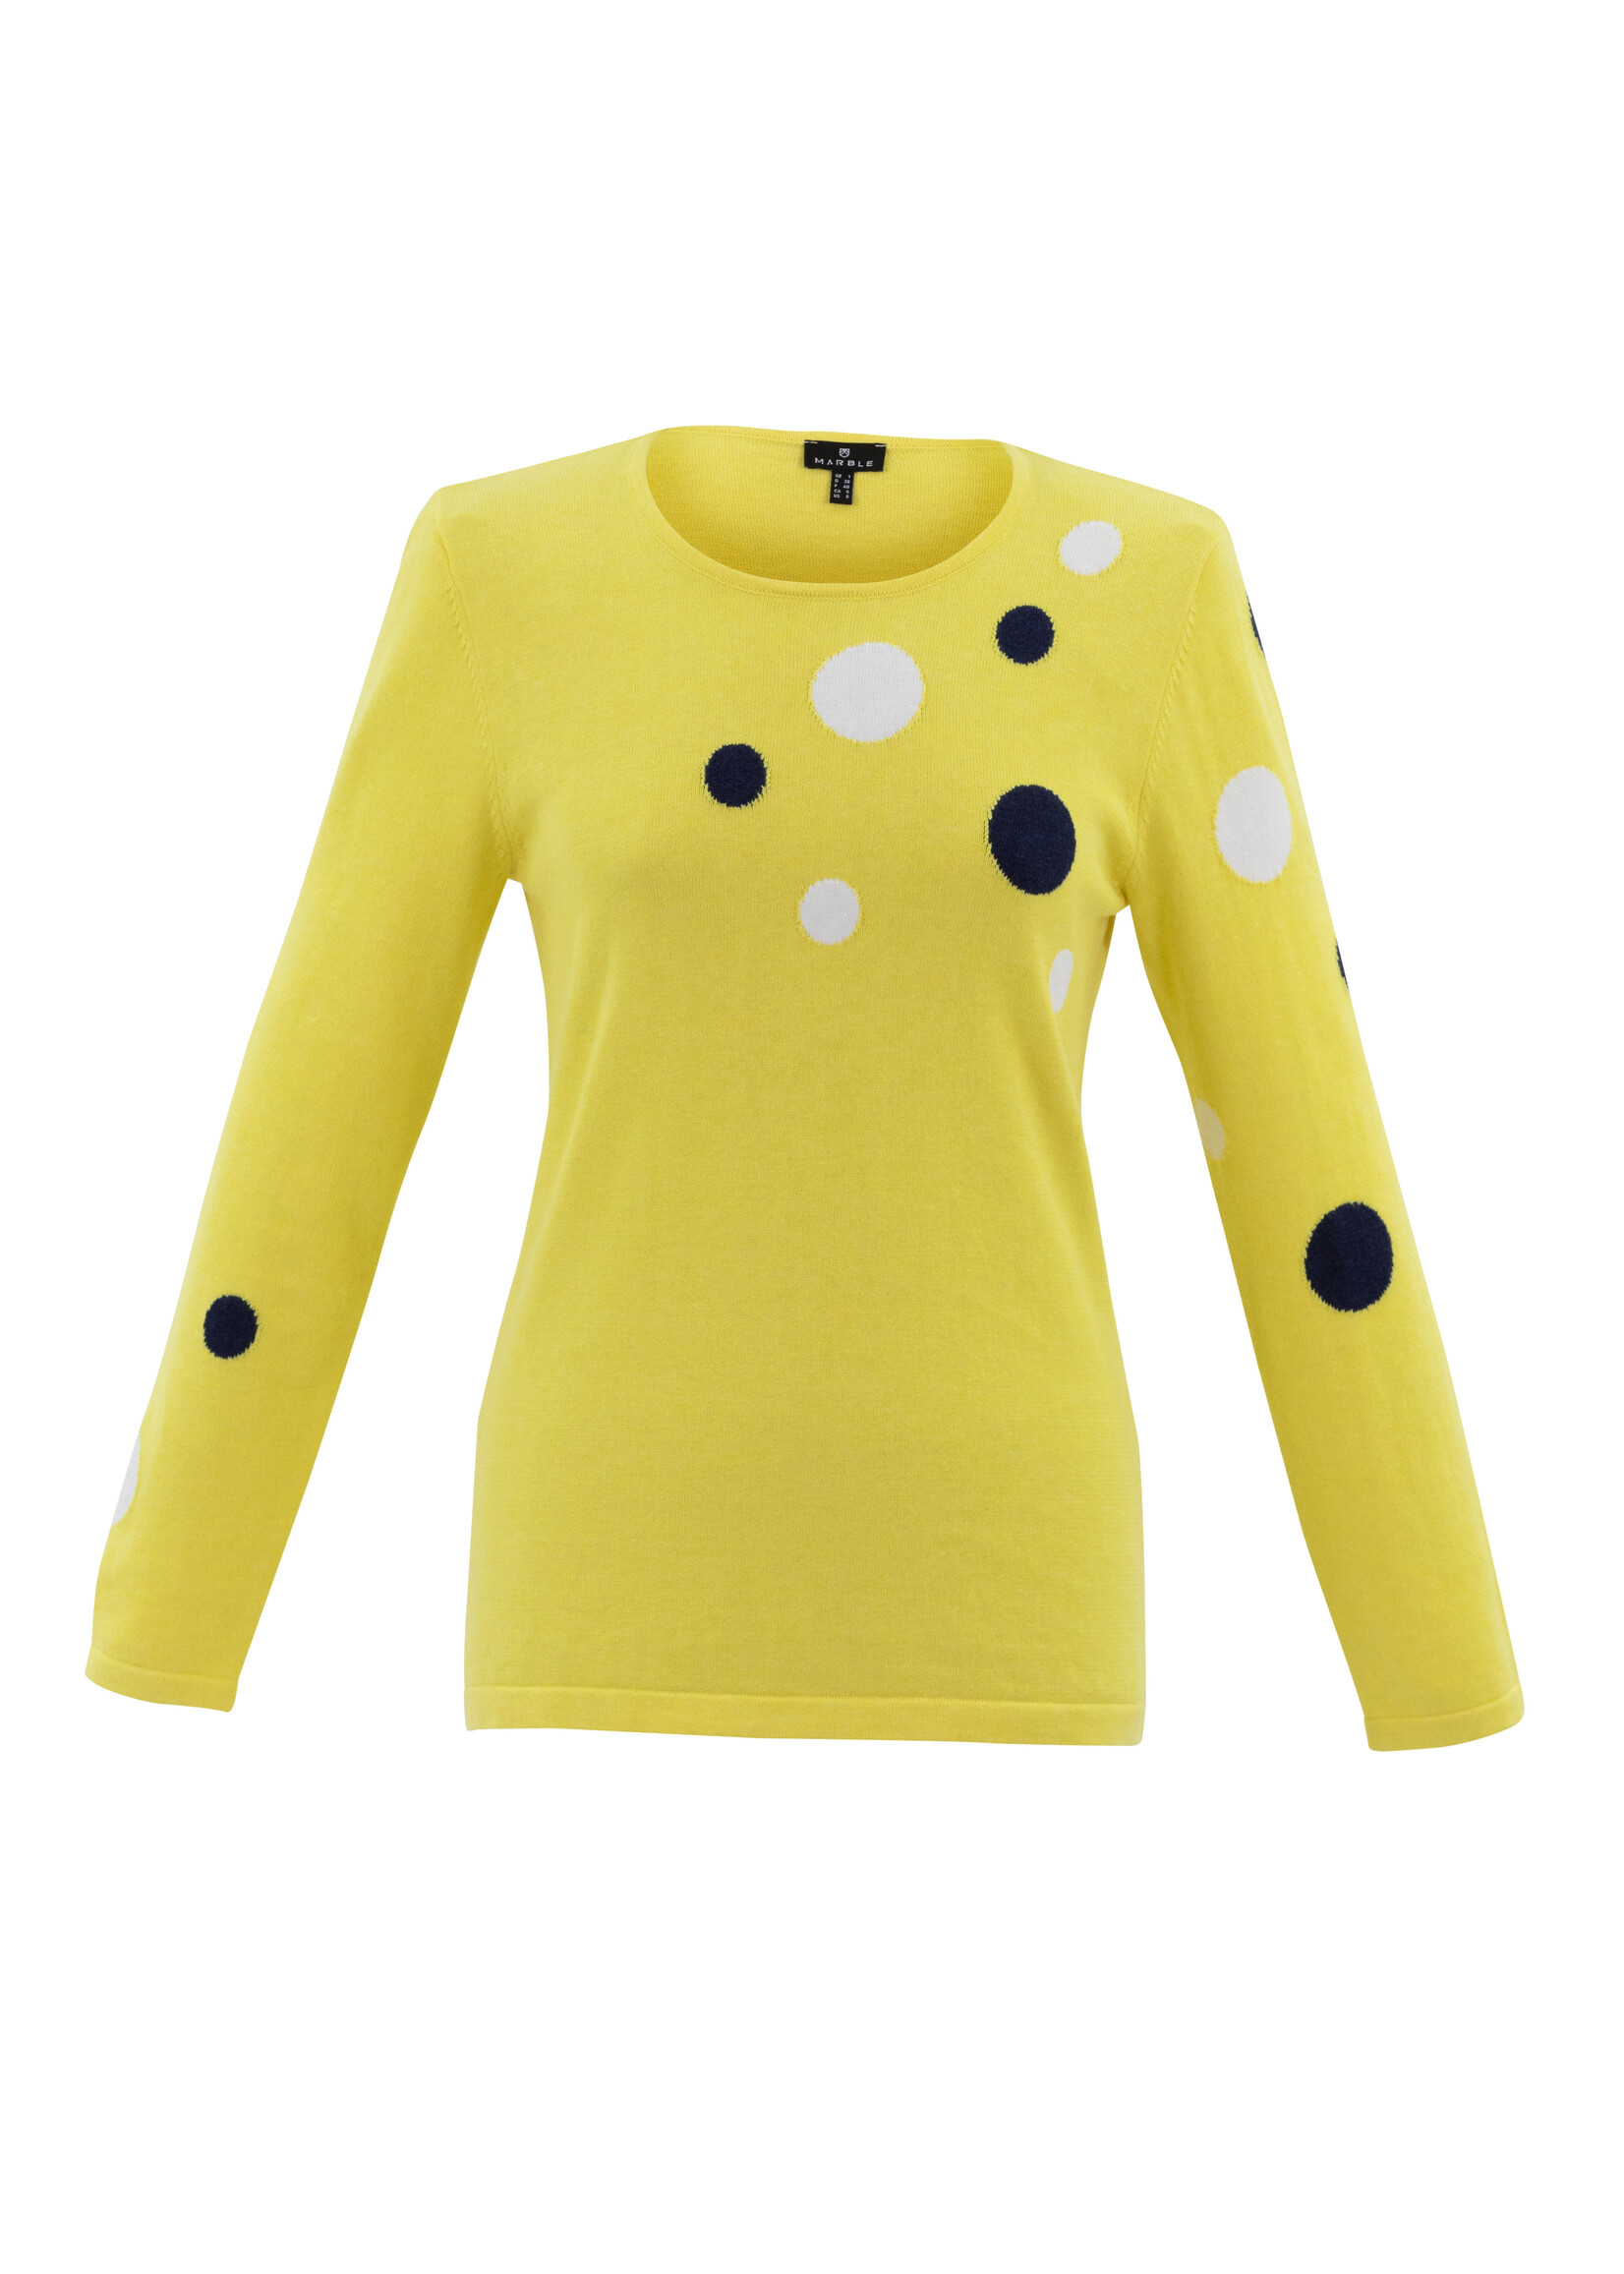 Marble Fashion Designs Marble Polka Dot Sweater